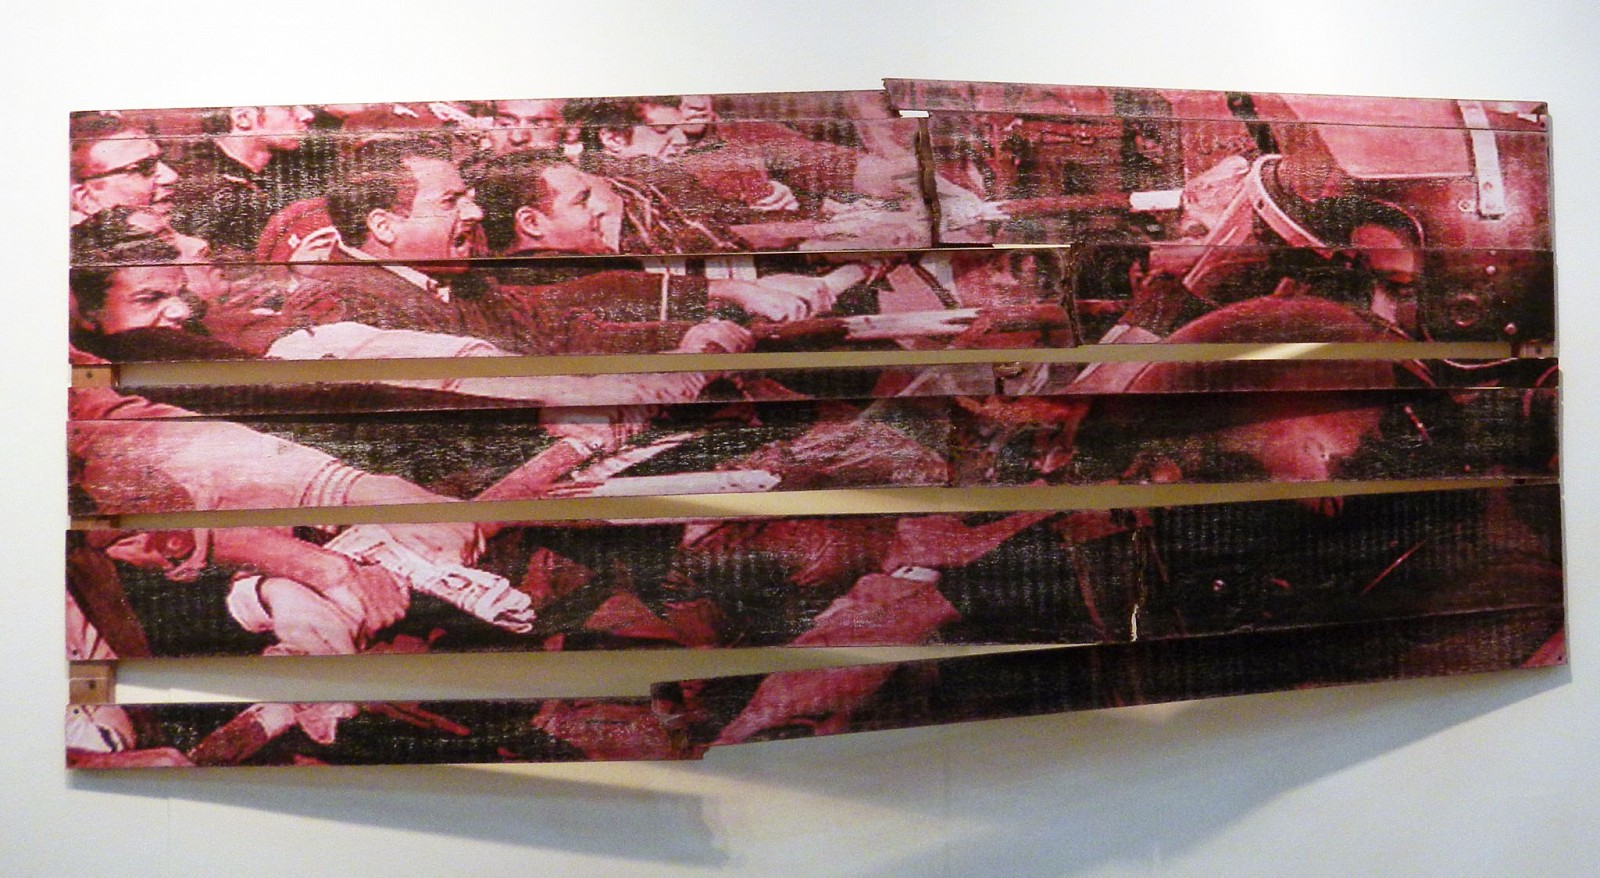 GRACIELA SACCO, Between Black and White- Series Admisible Tension, 2011
Installation on wall - Photographic inlay on wood, 94 1/2 x 37 3/8 in. (240 x 95 cm)
SG-C-0086